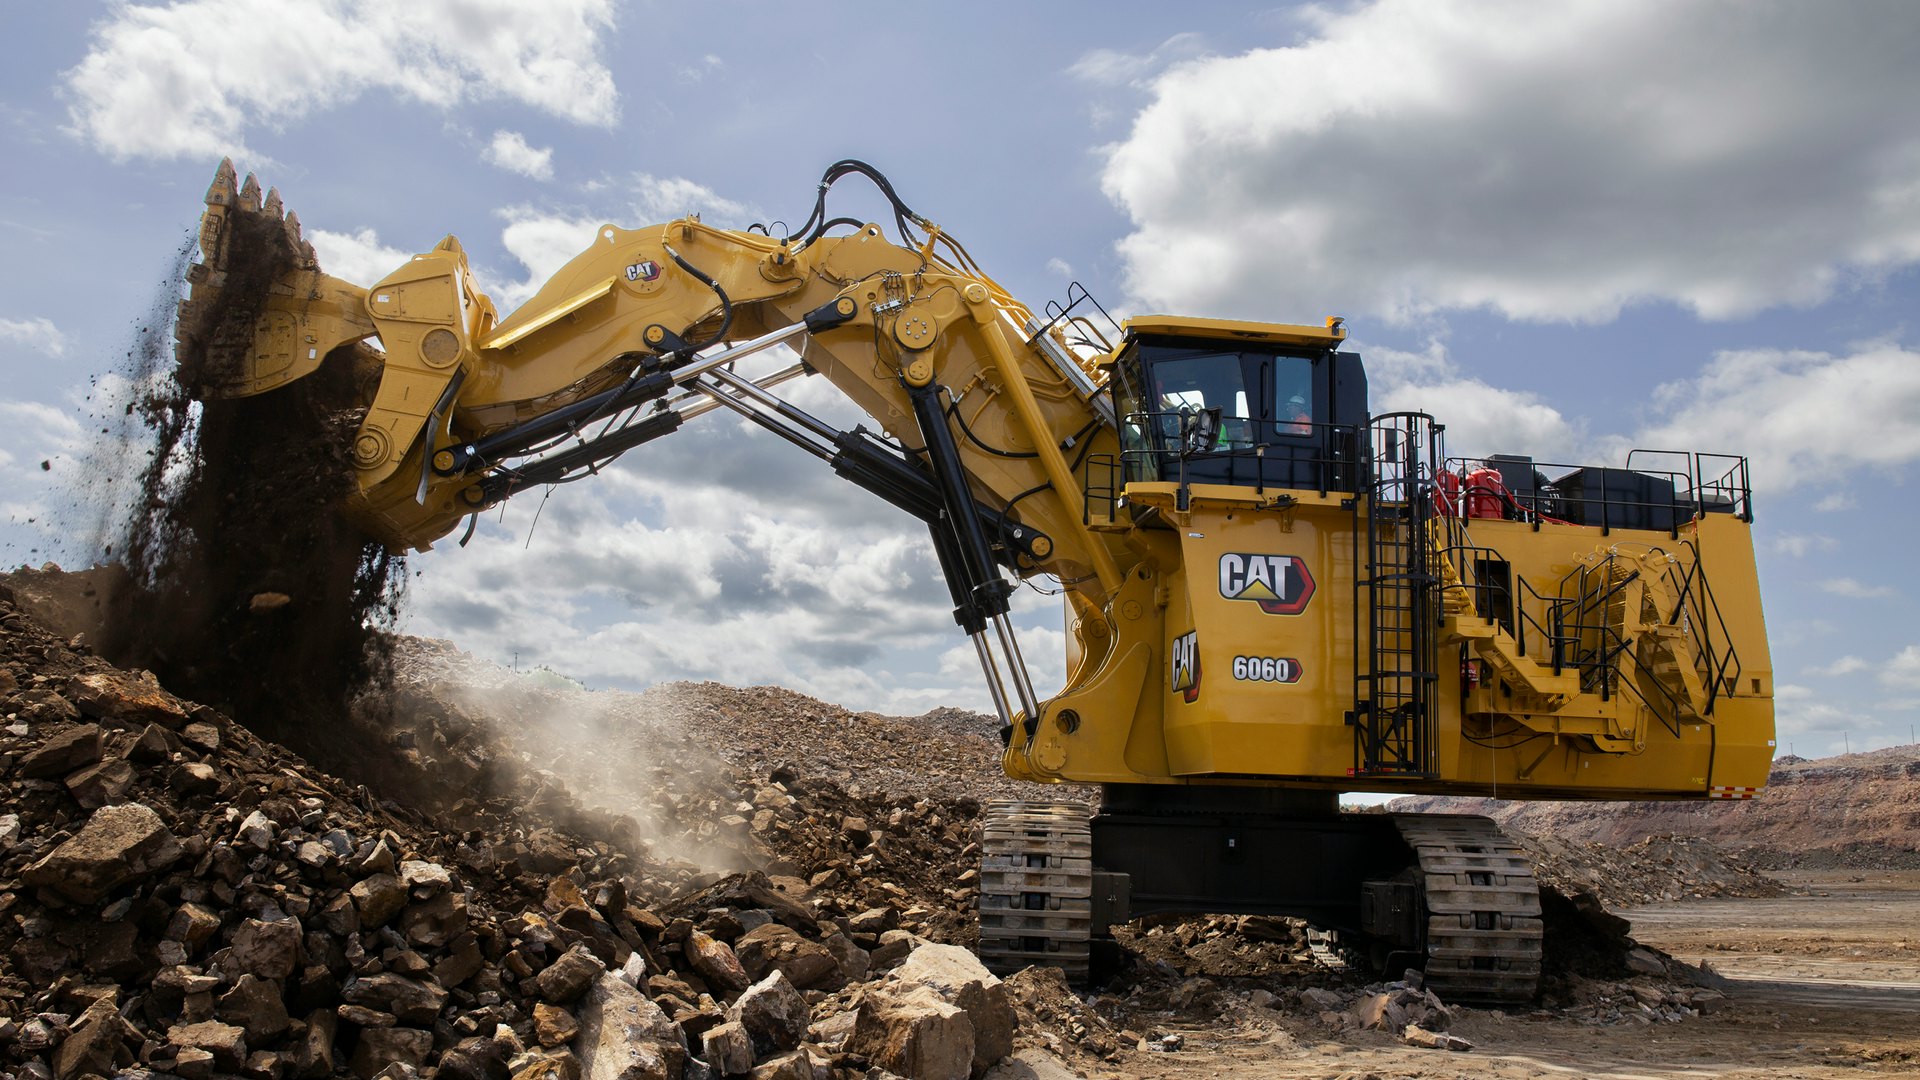 Next Generation Cat 6060 Hydraulic Mining Shovel Features Increased  Performance and Durability | OEM Off-Highway